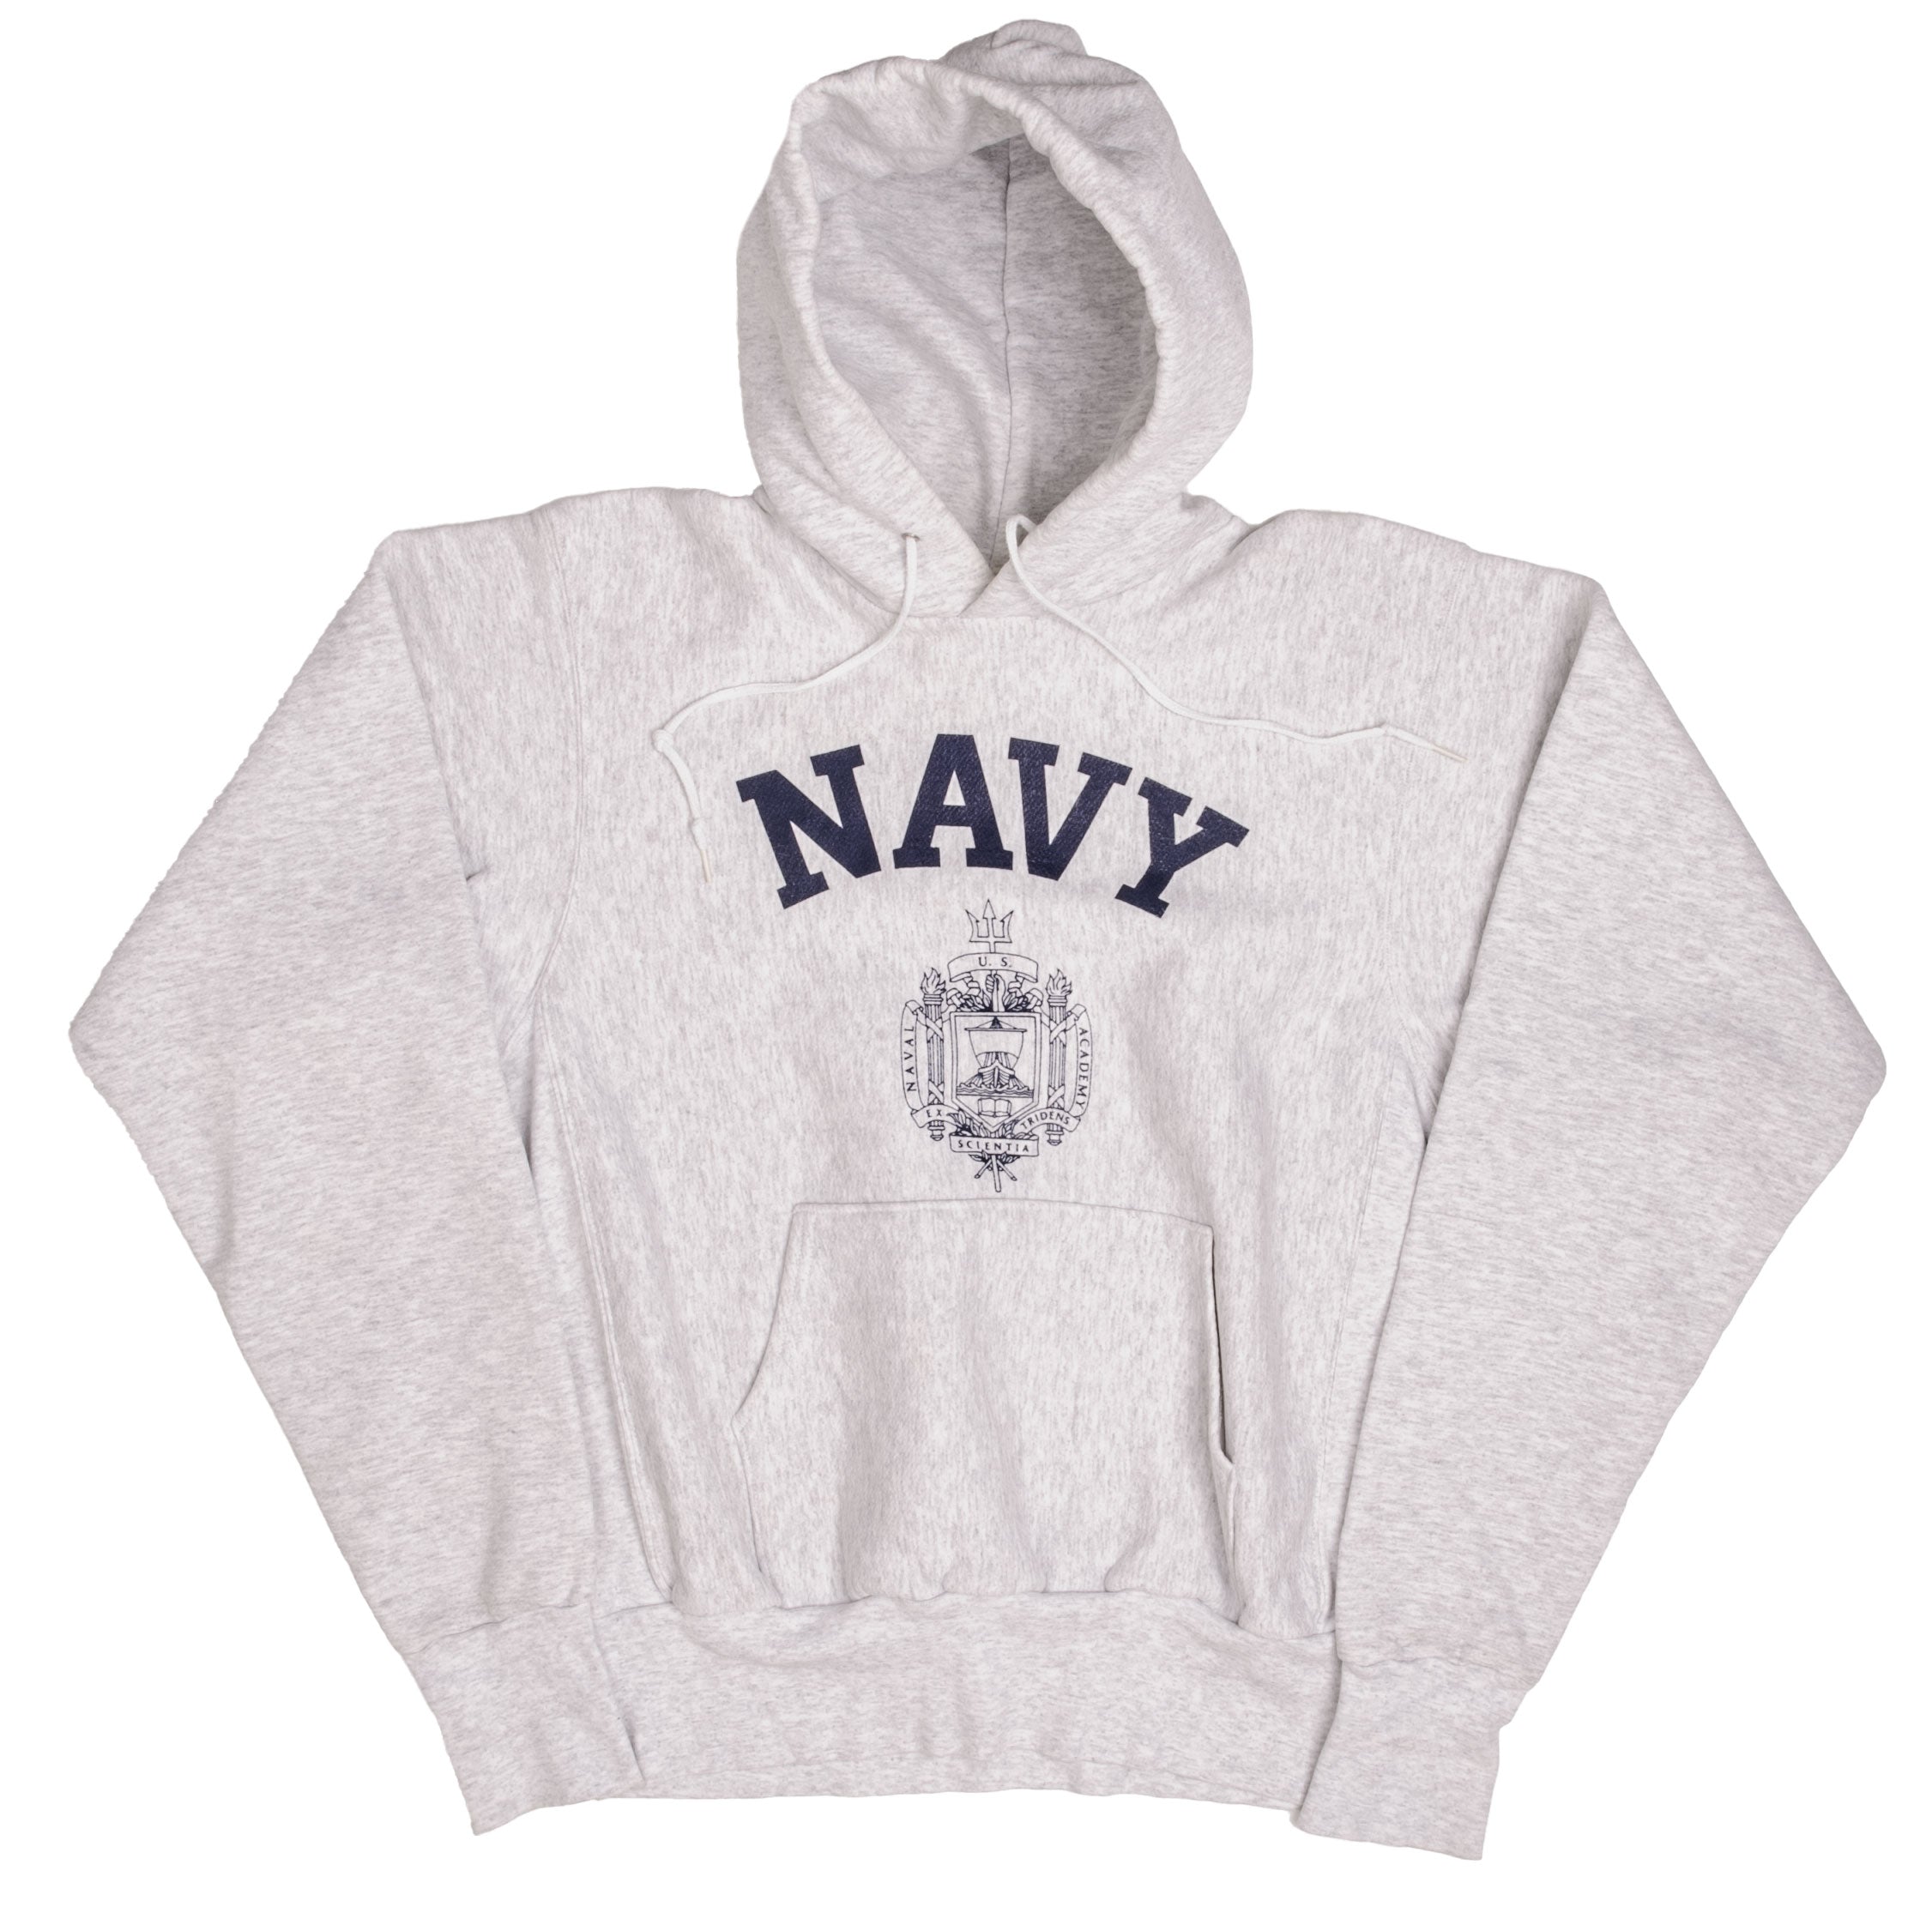 VINTAGE USN US NAVY HOODIE SWEATSHIRT SIZE SMALL MADE IN USA